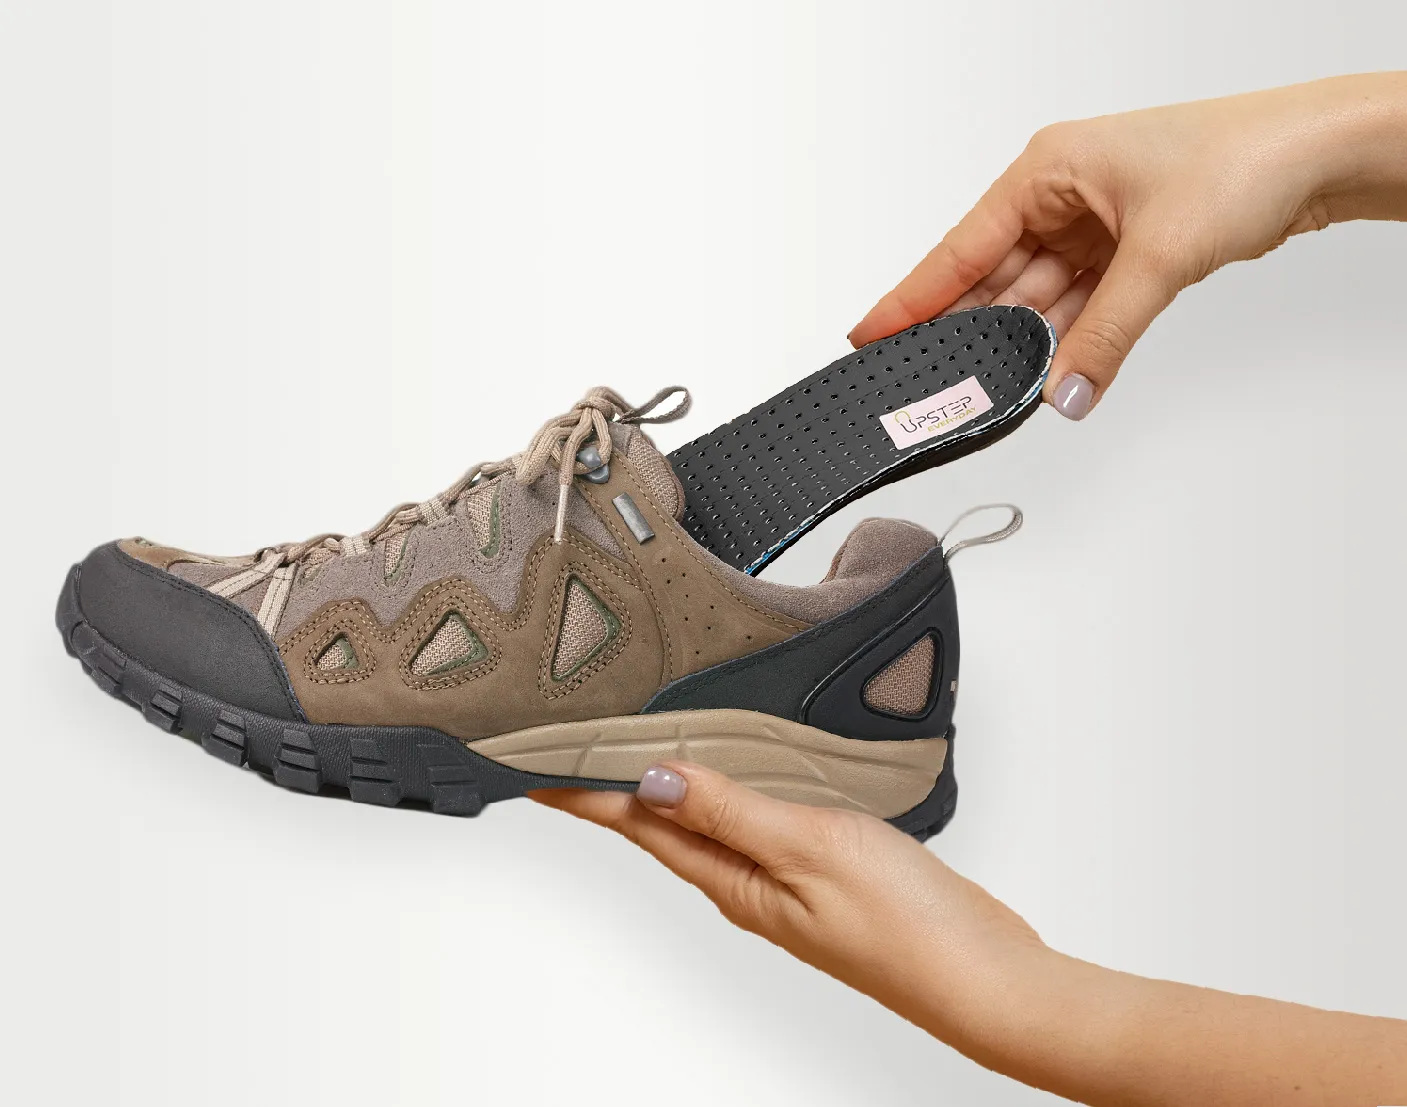 Placing Upstep's On My Feet All Day shoe orthotics into a brown hiking shoe.